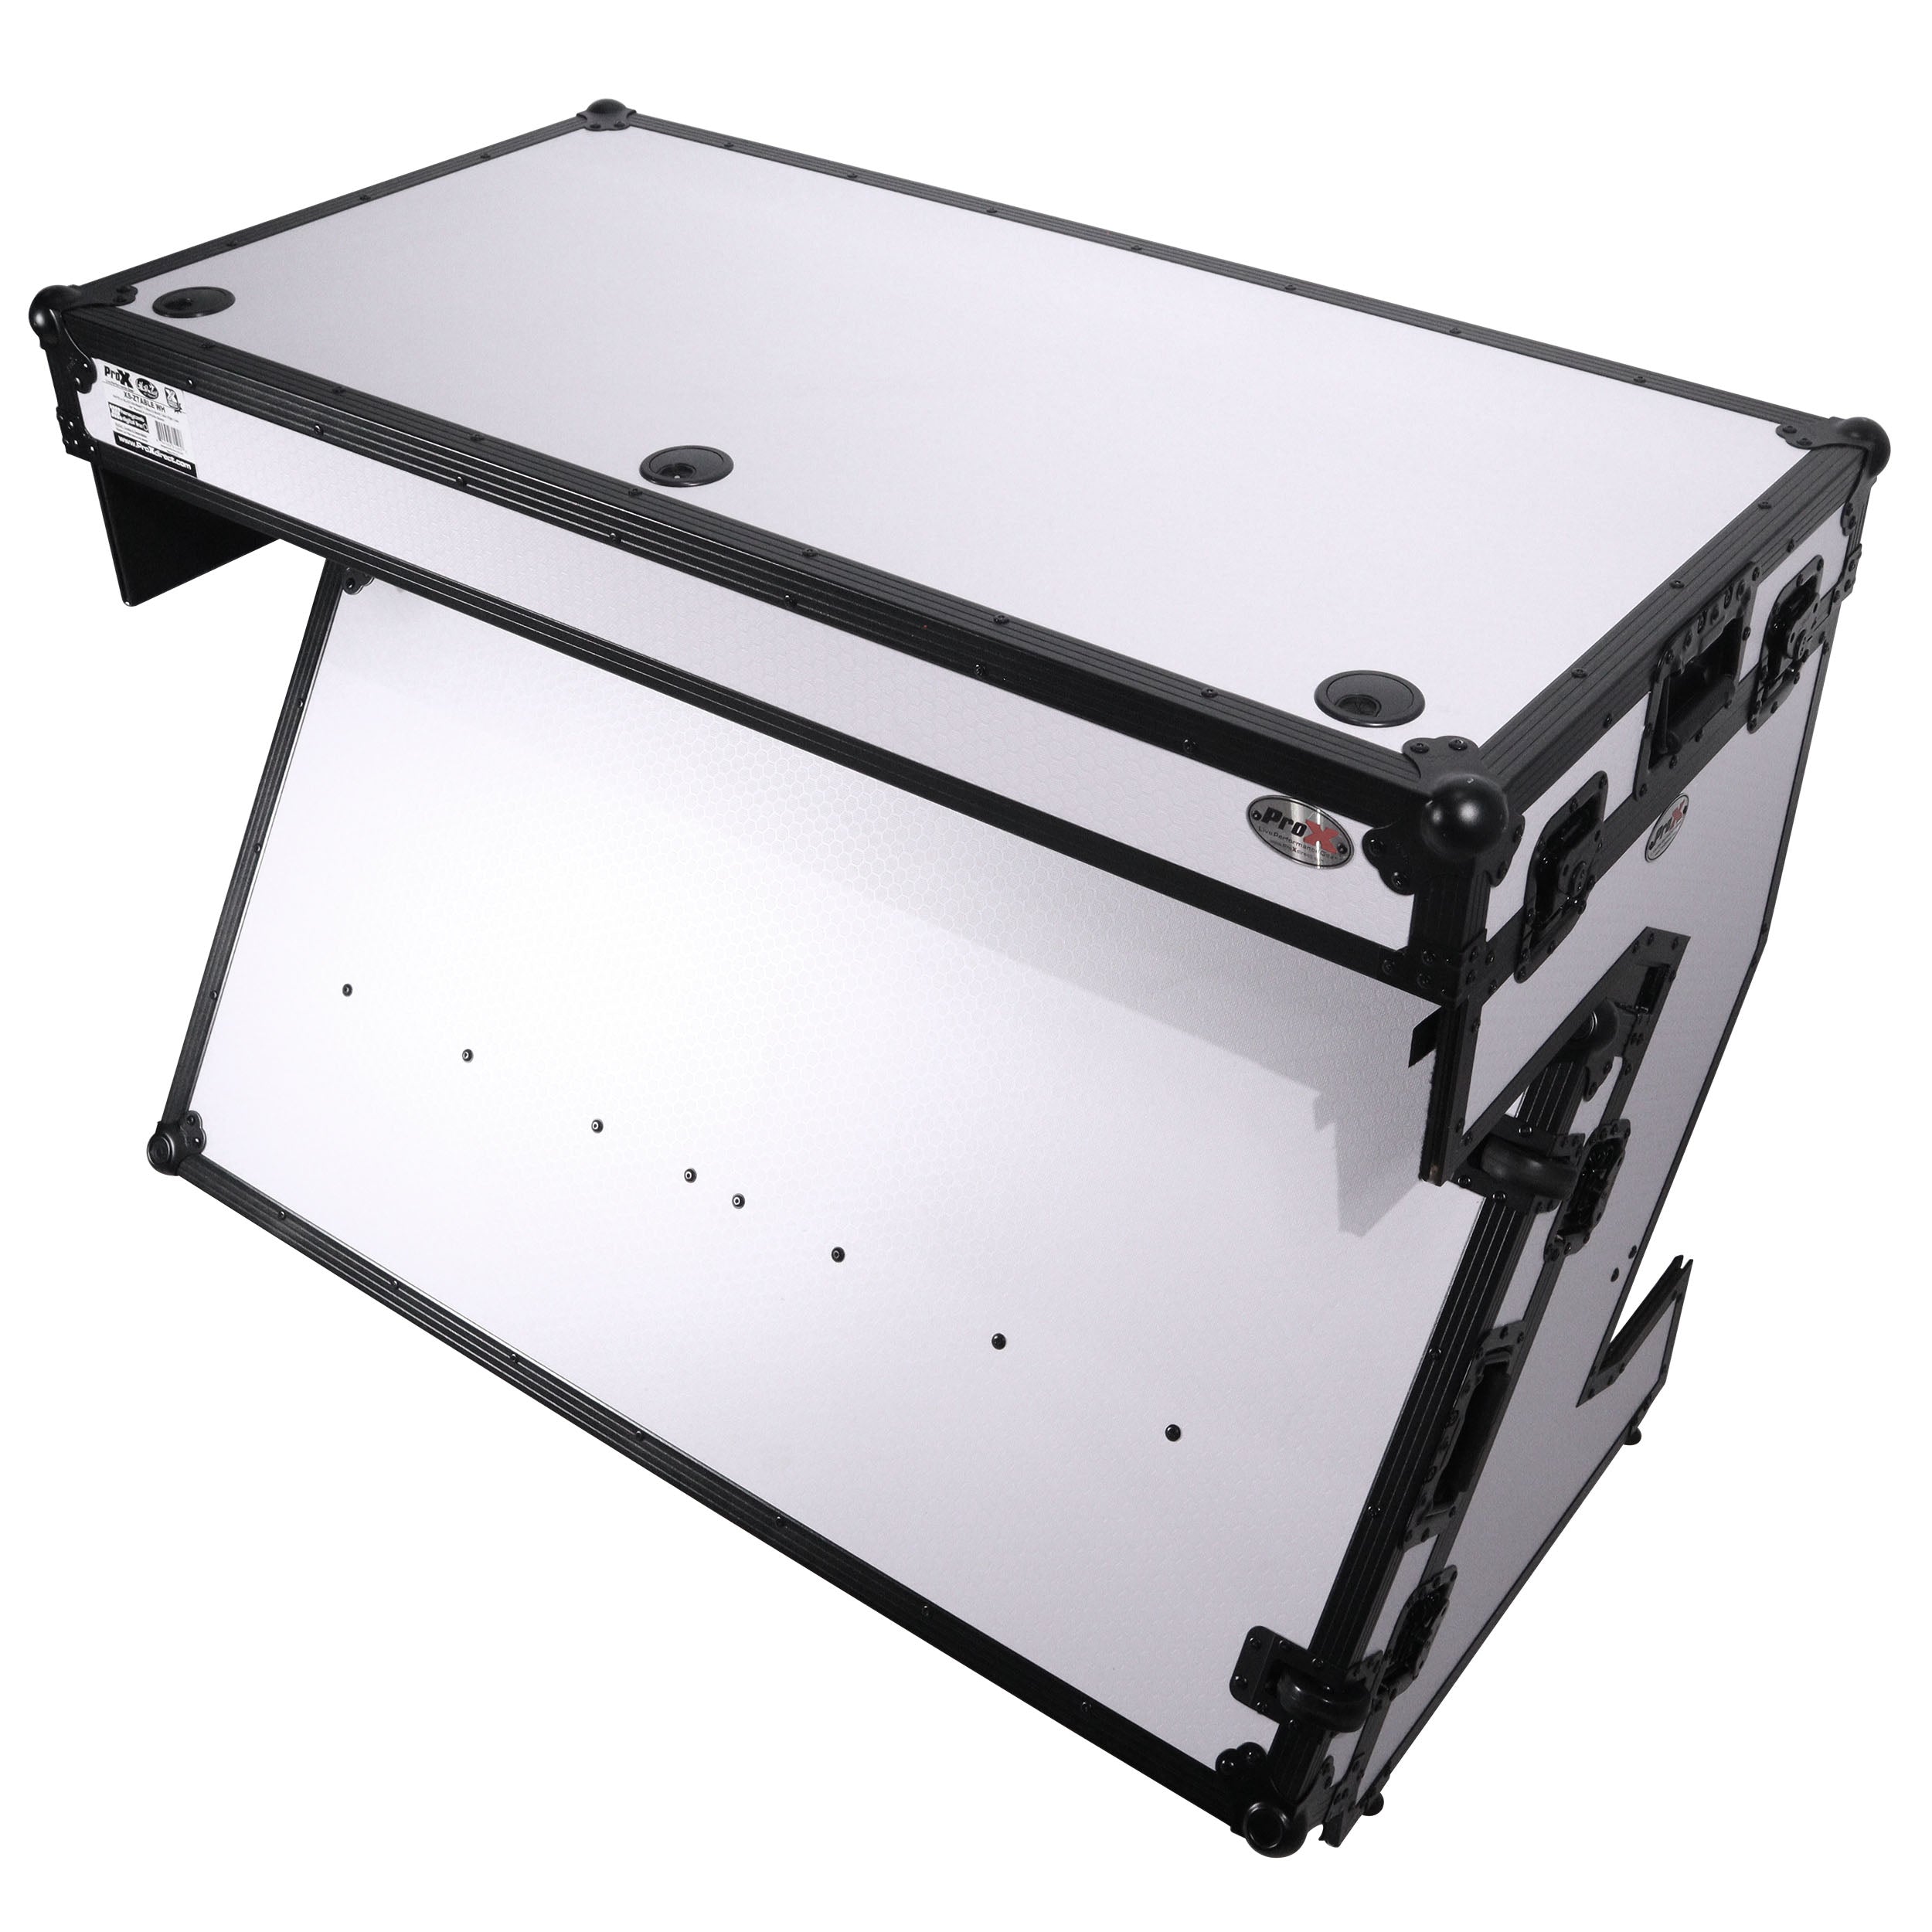 Pro X Z-Table Folding DJ Table Mobile Workstation Flight Case Style with Handles and Wheels - Black White Finish XS-ZTABLEWH